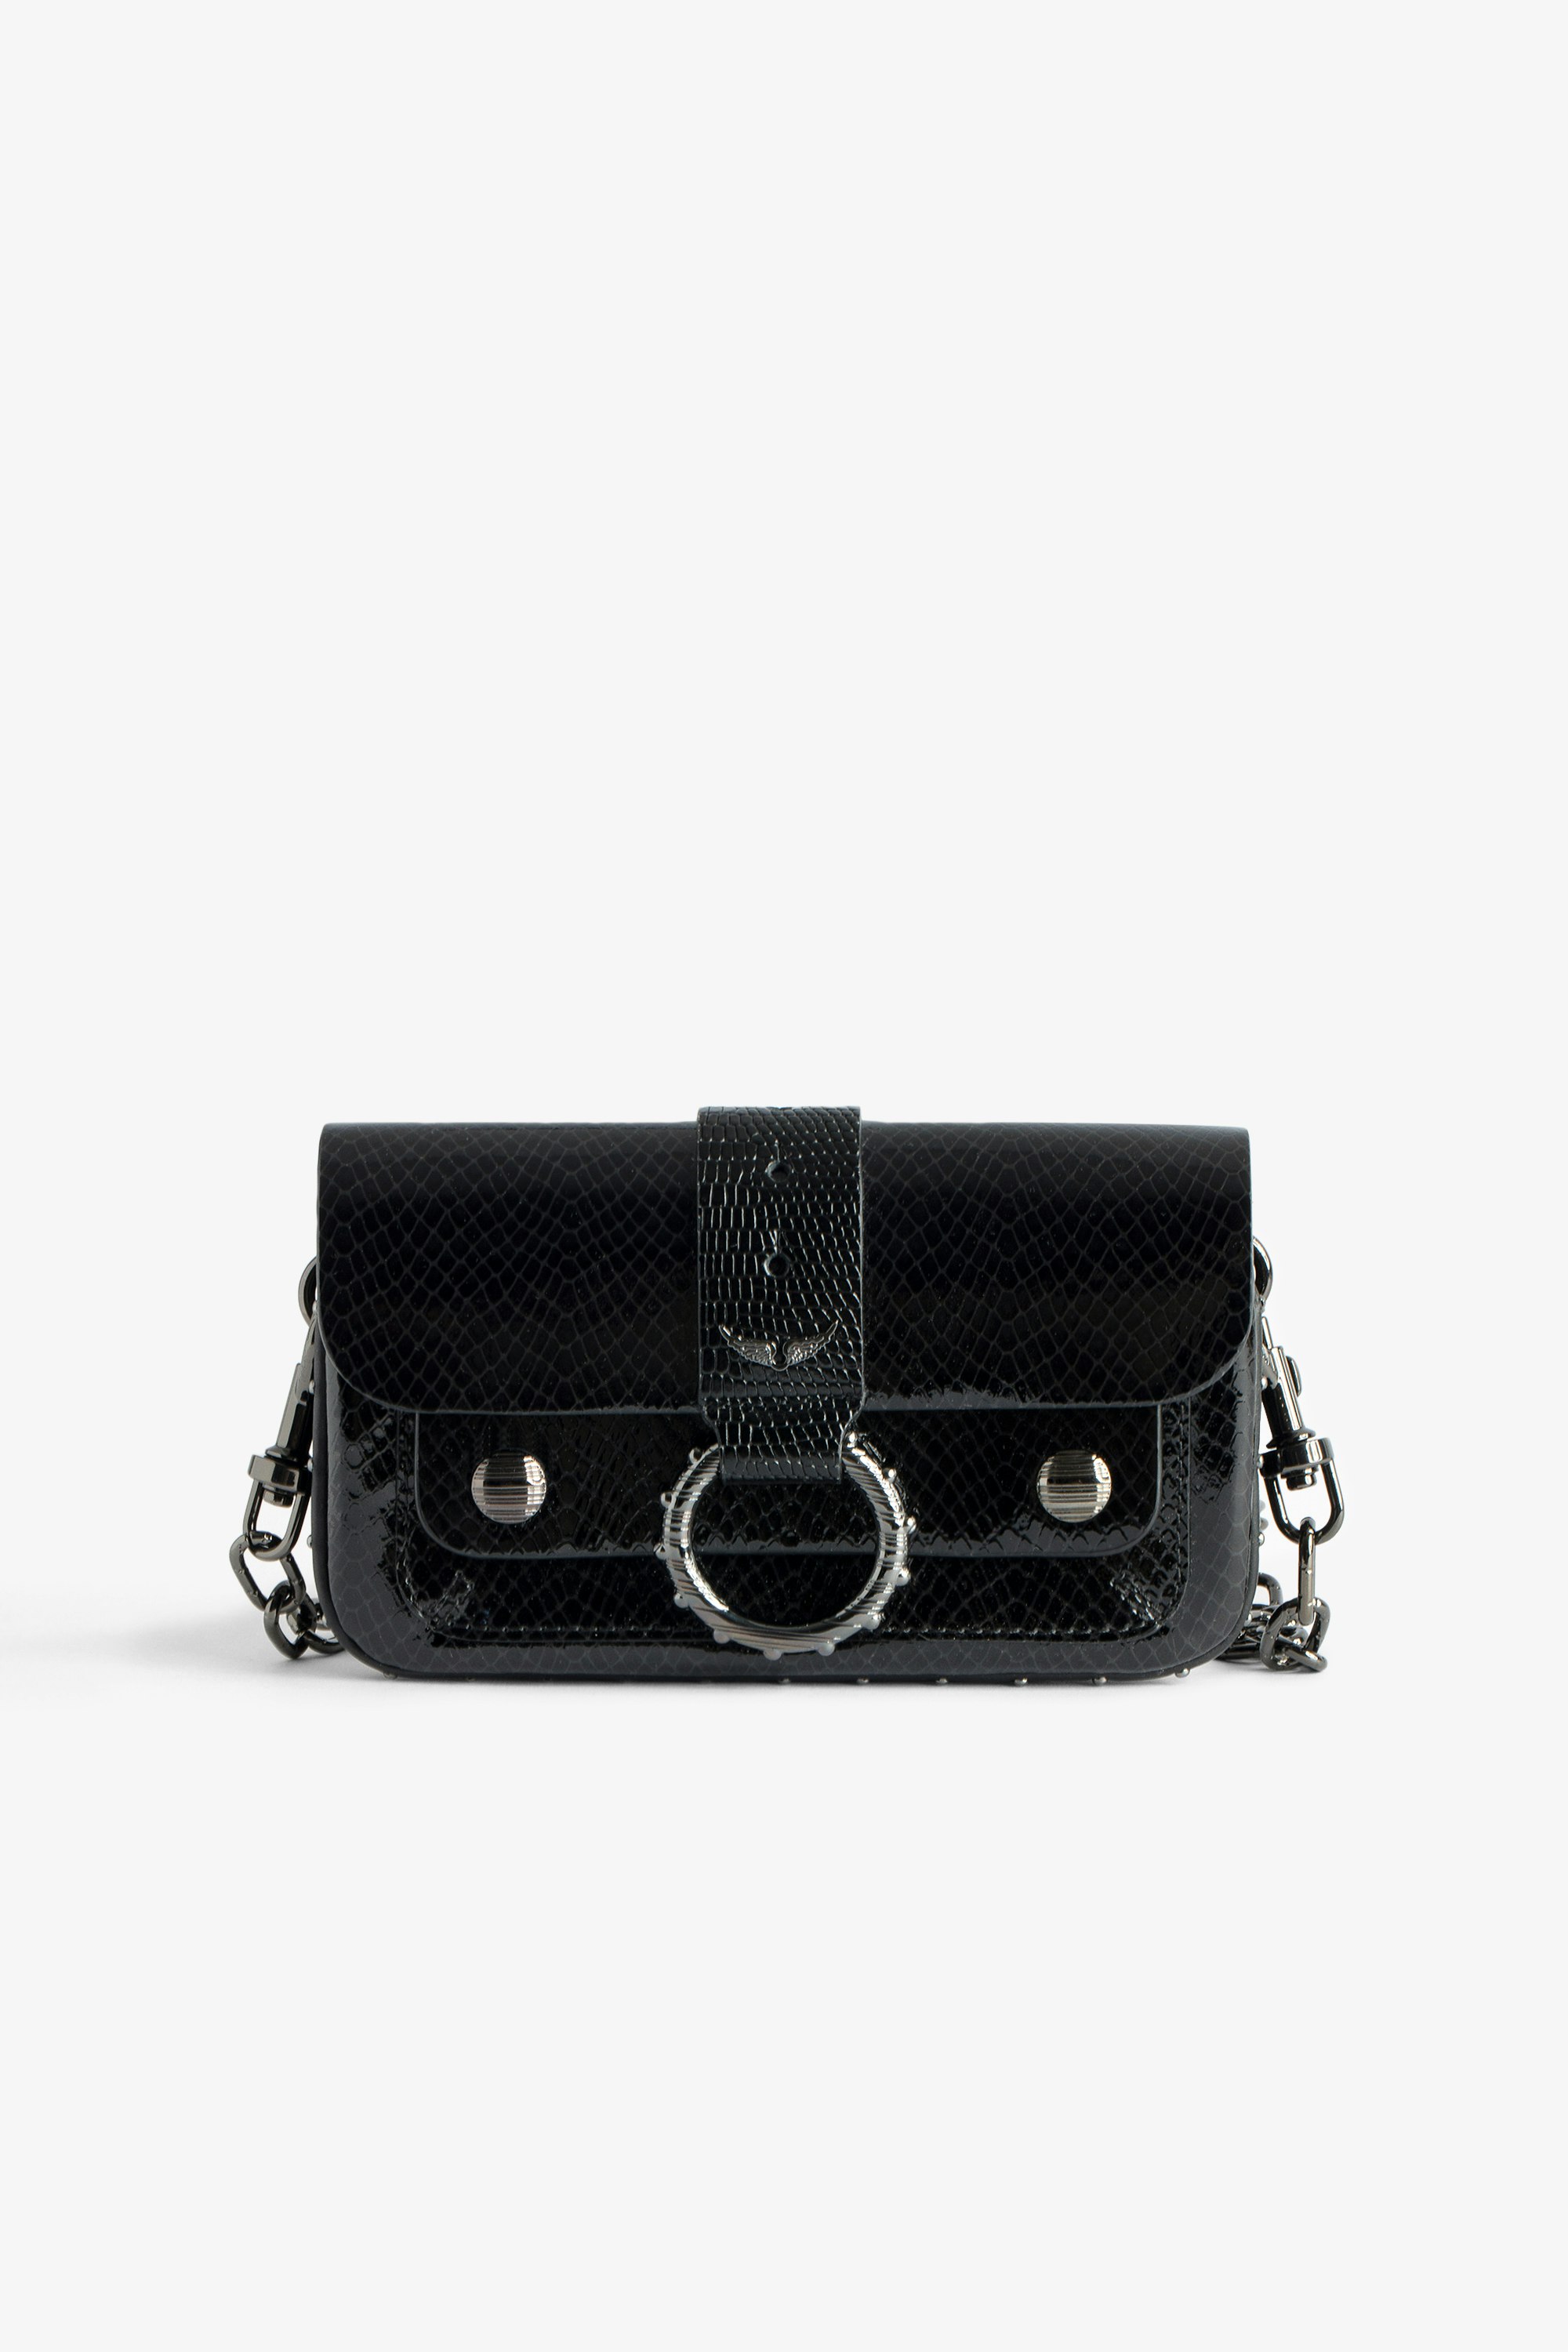 Kate Wallet Glossy Wild Embossed Bag - Women’s black iguana-embossed patent leather mini bag with metal chain.